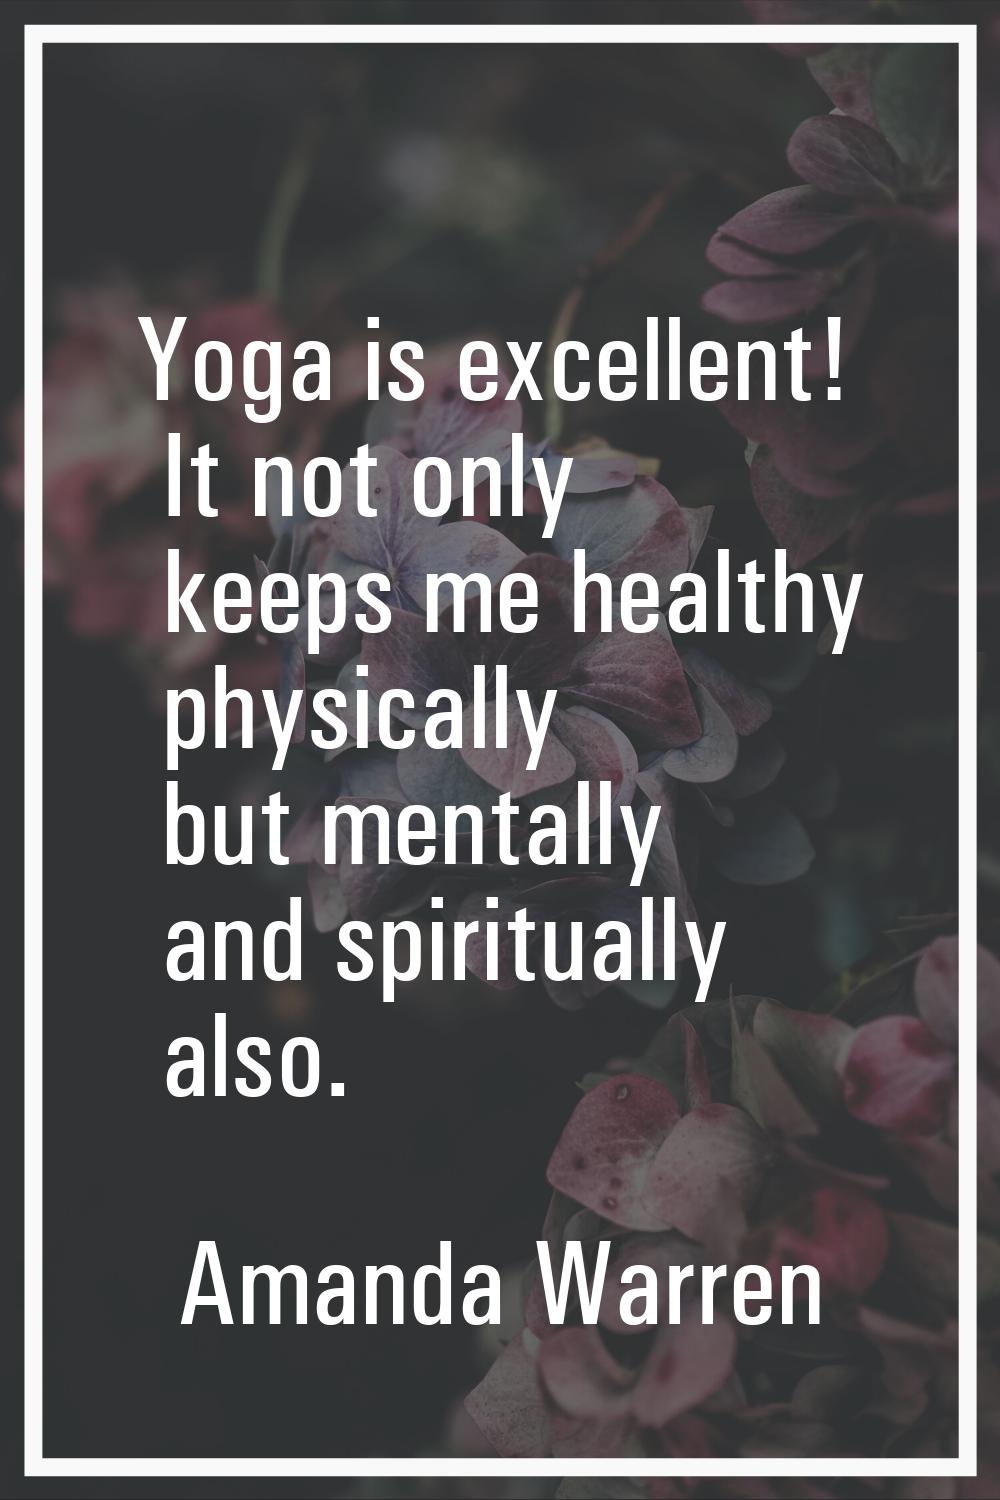 Yoga is excellent! It not only keeps me healthy physically but mentally and spiritually also.